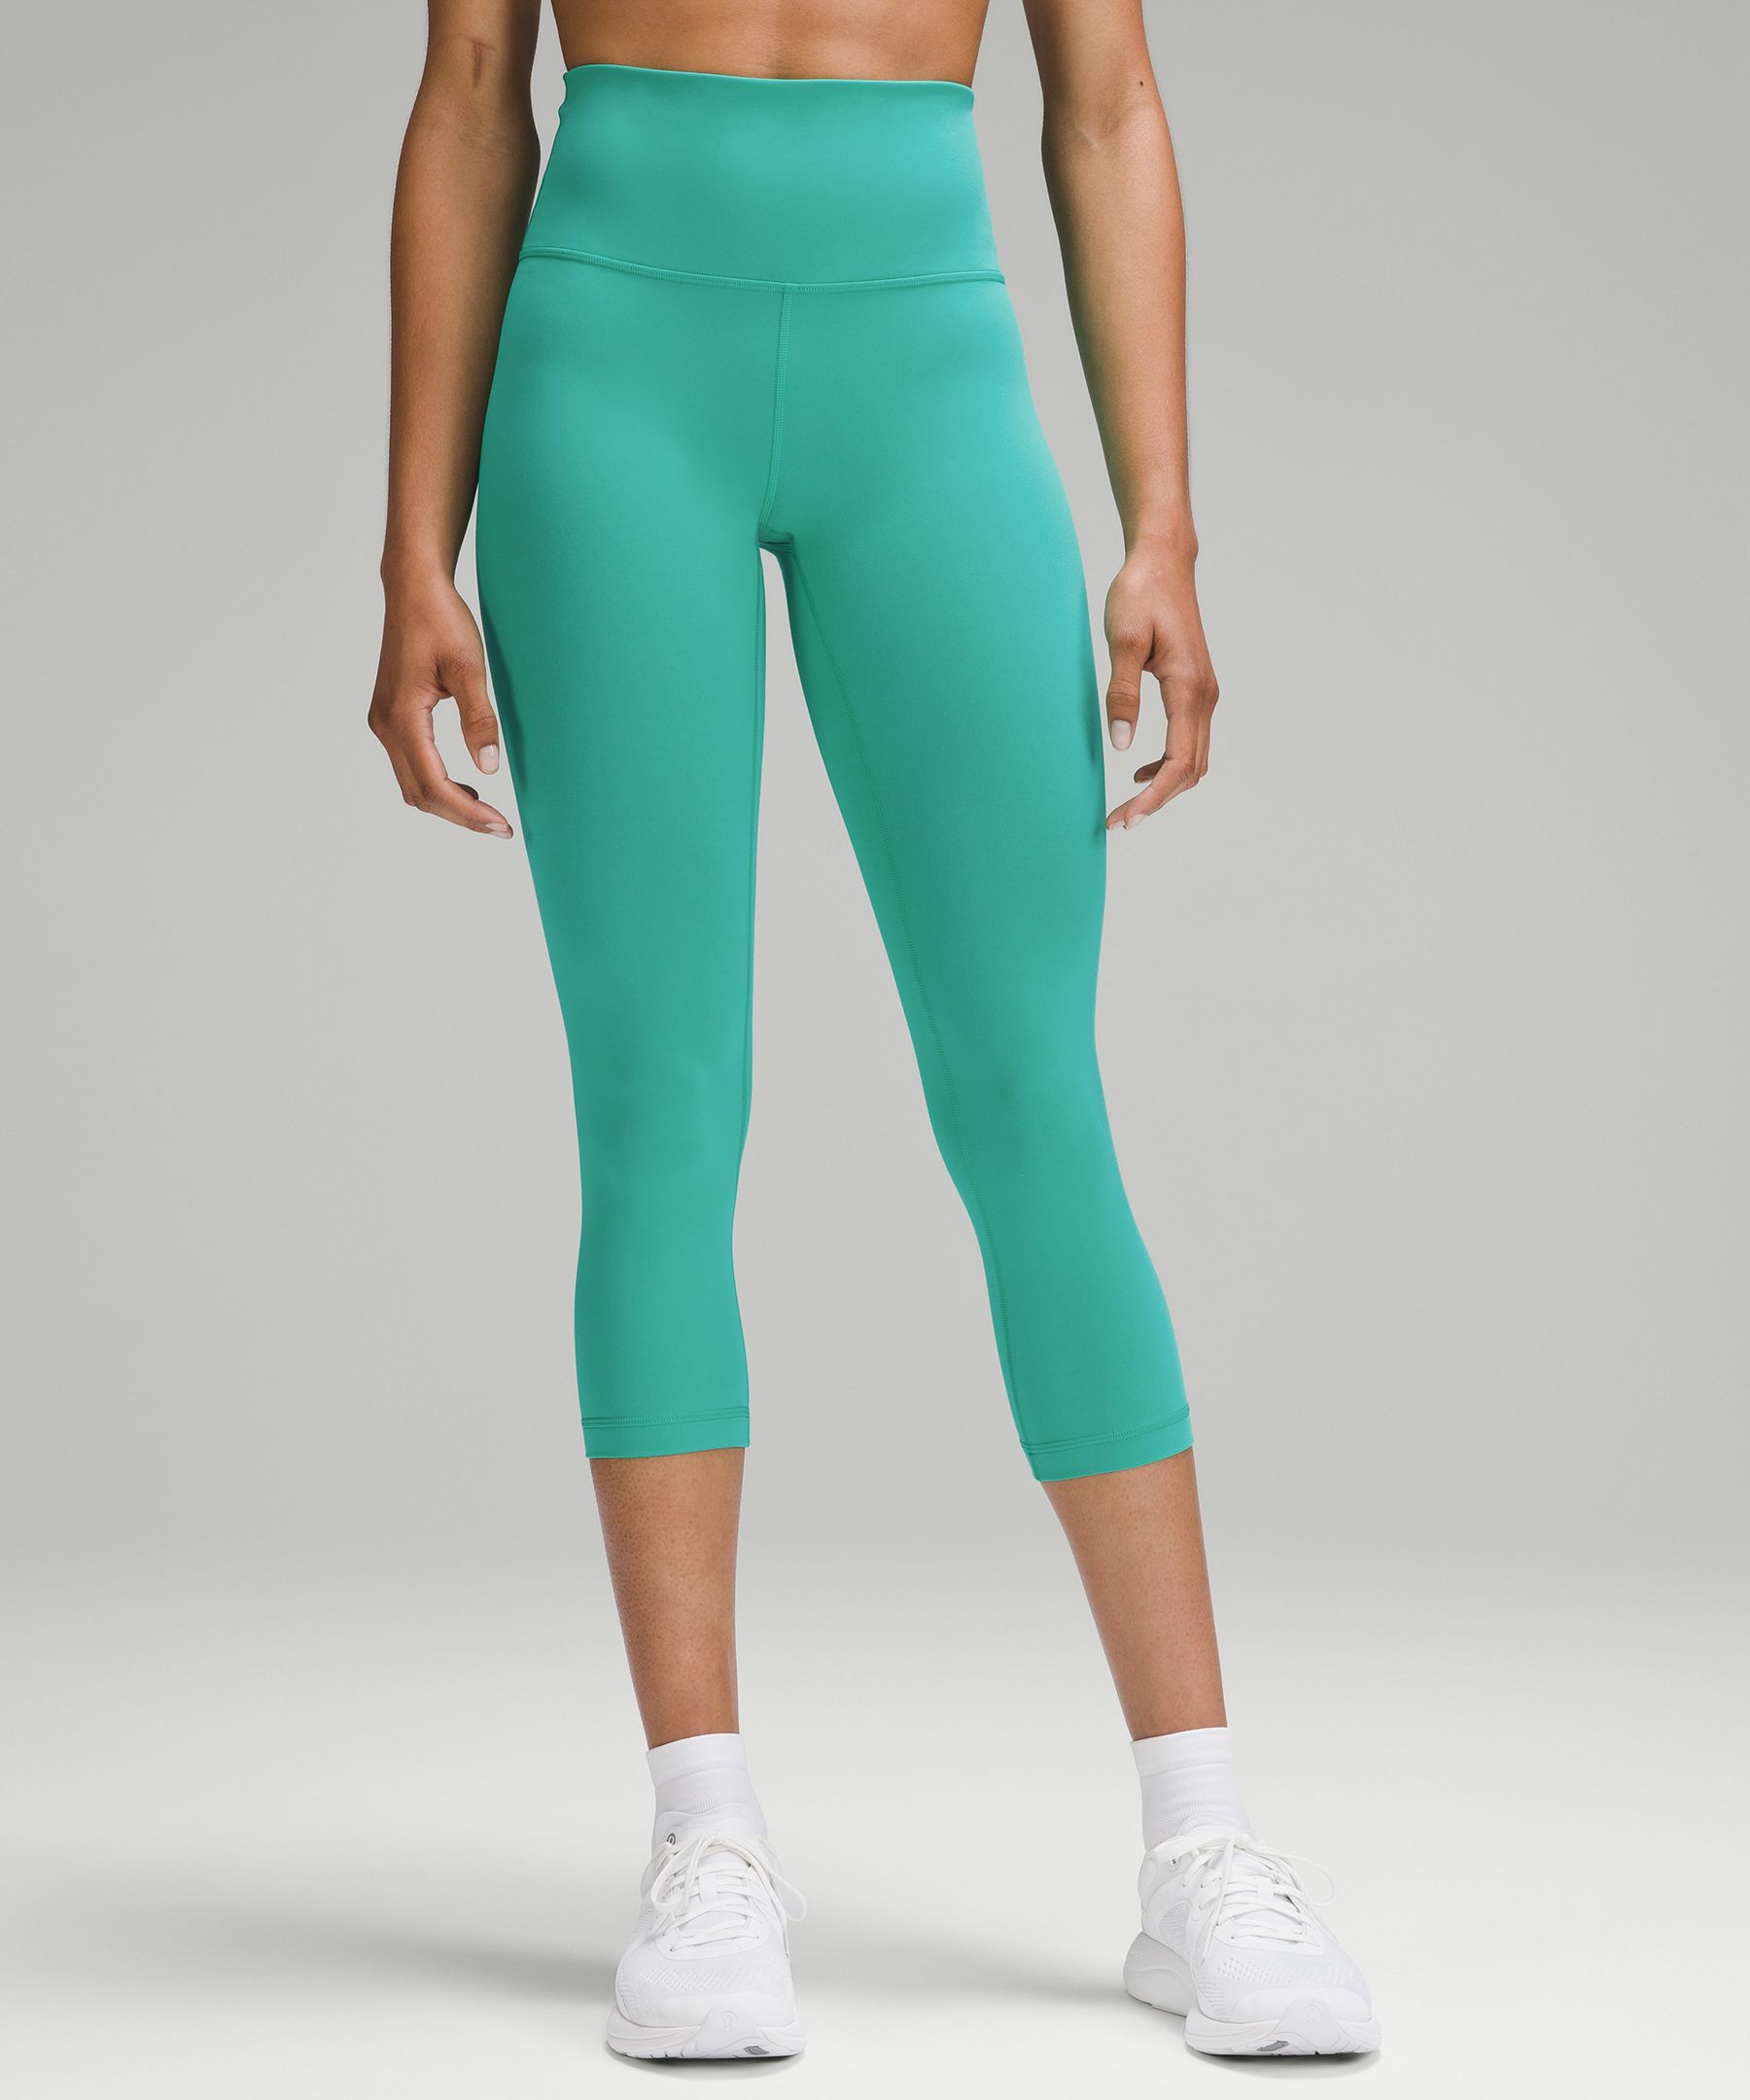 SHAPE MINT BODY Ice Feeling Ultra Thin High Waisted Belly Pants